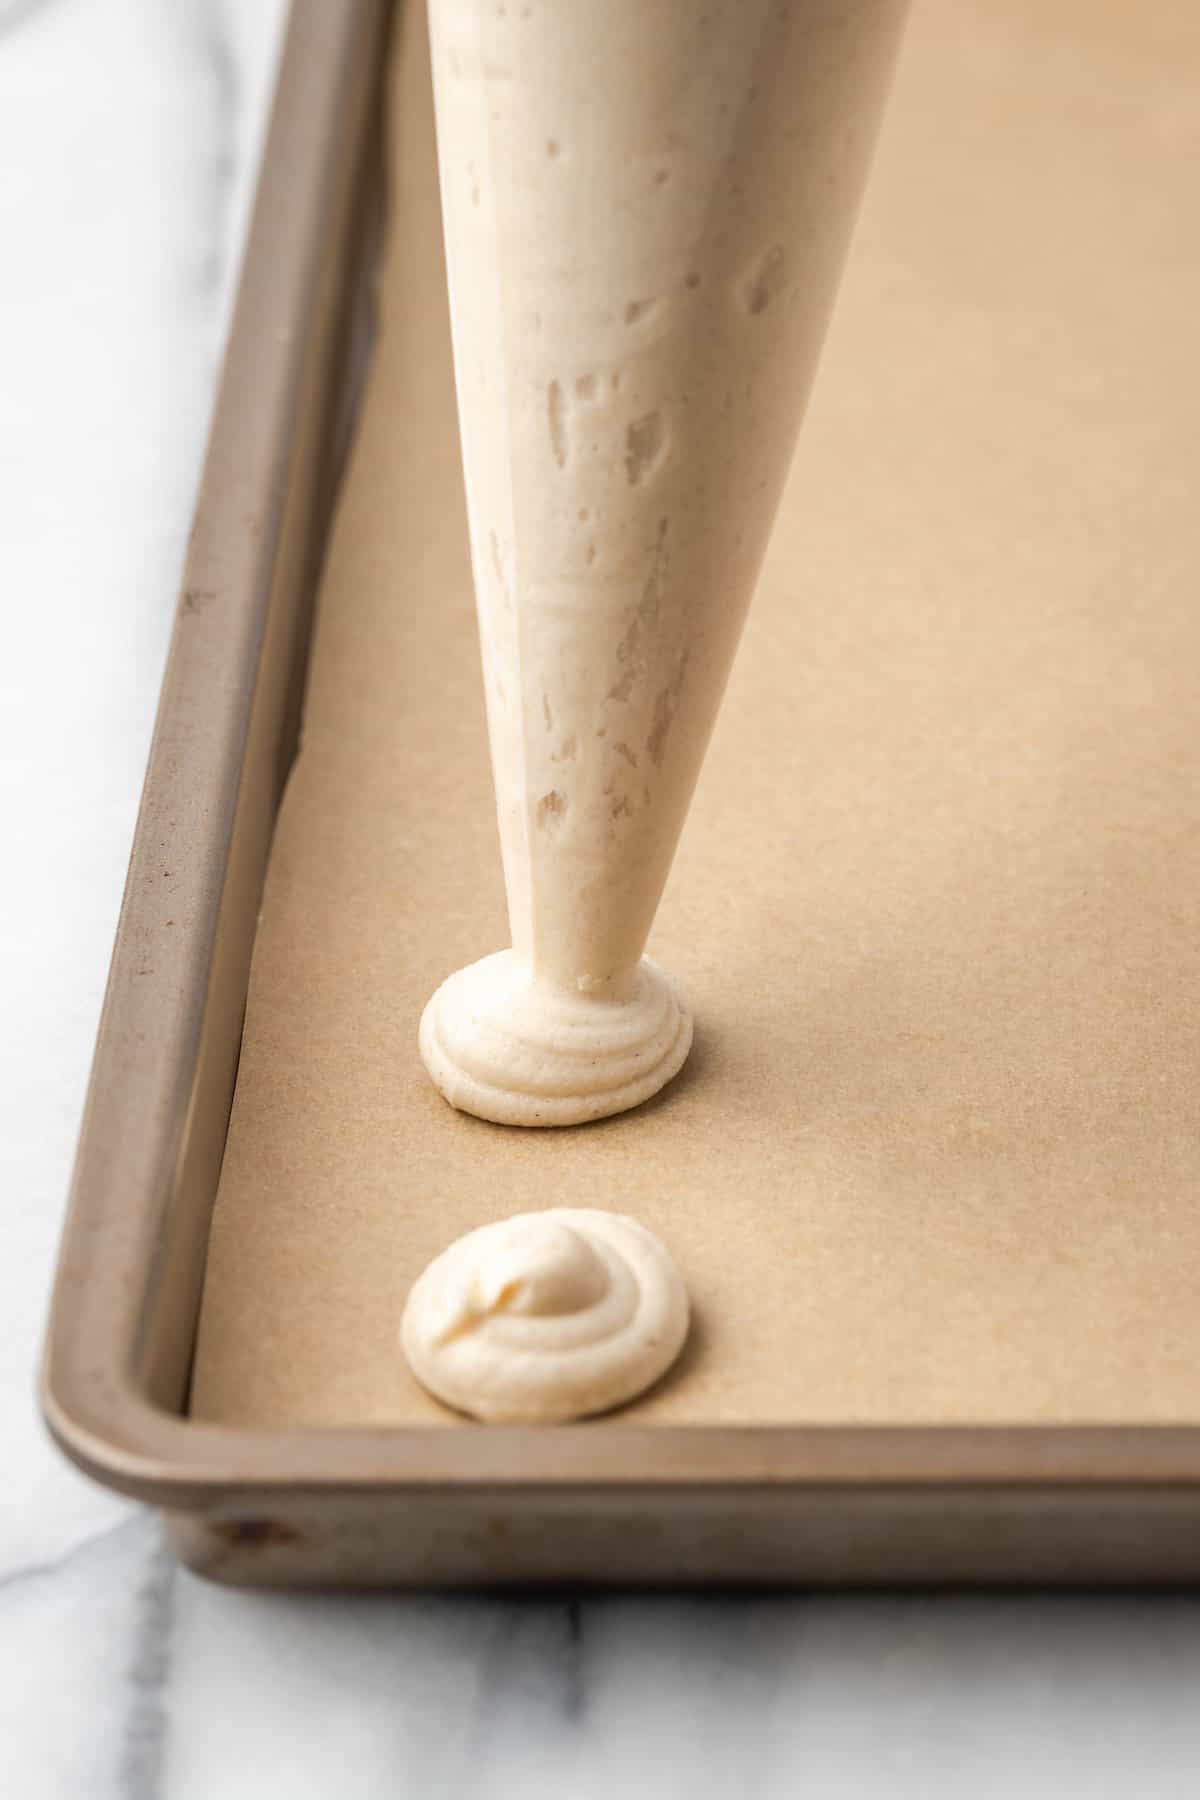 A piping bag pipes swirls of gluten-free wafer batter onto a lined baking sheet.